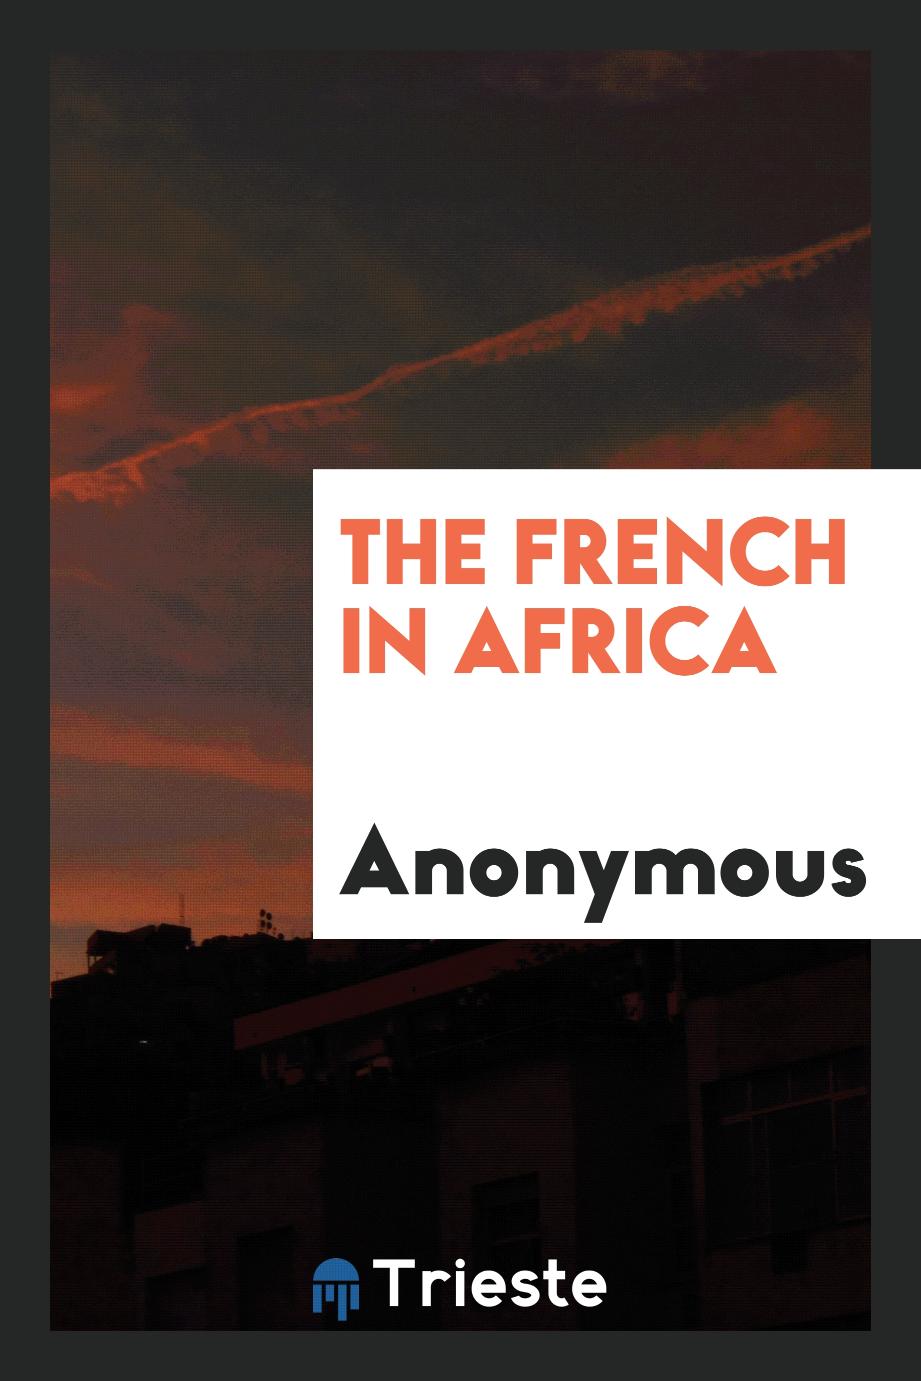 The French in Africa